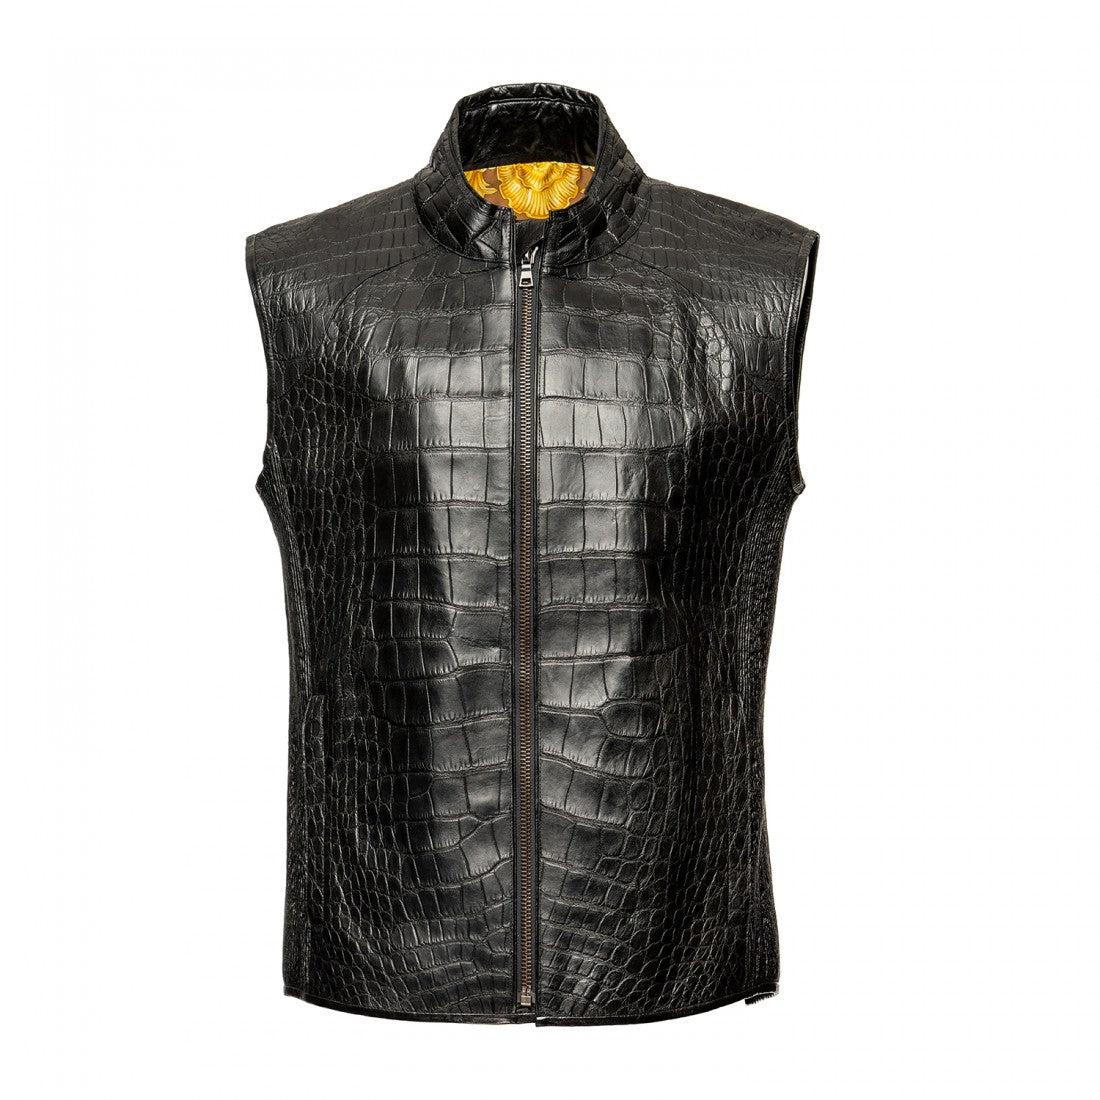 VL003G - Cuadra black casual fashion full exotic alligator leather vest for men-Kuet.us - Cuadra Boots - Western Cowboy, Casual Fashion and Dress Boots